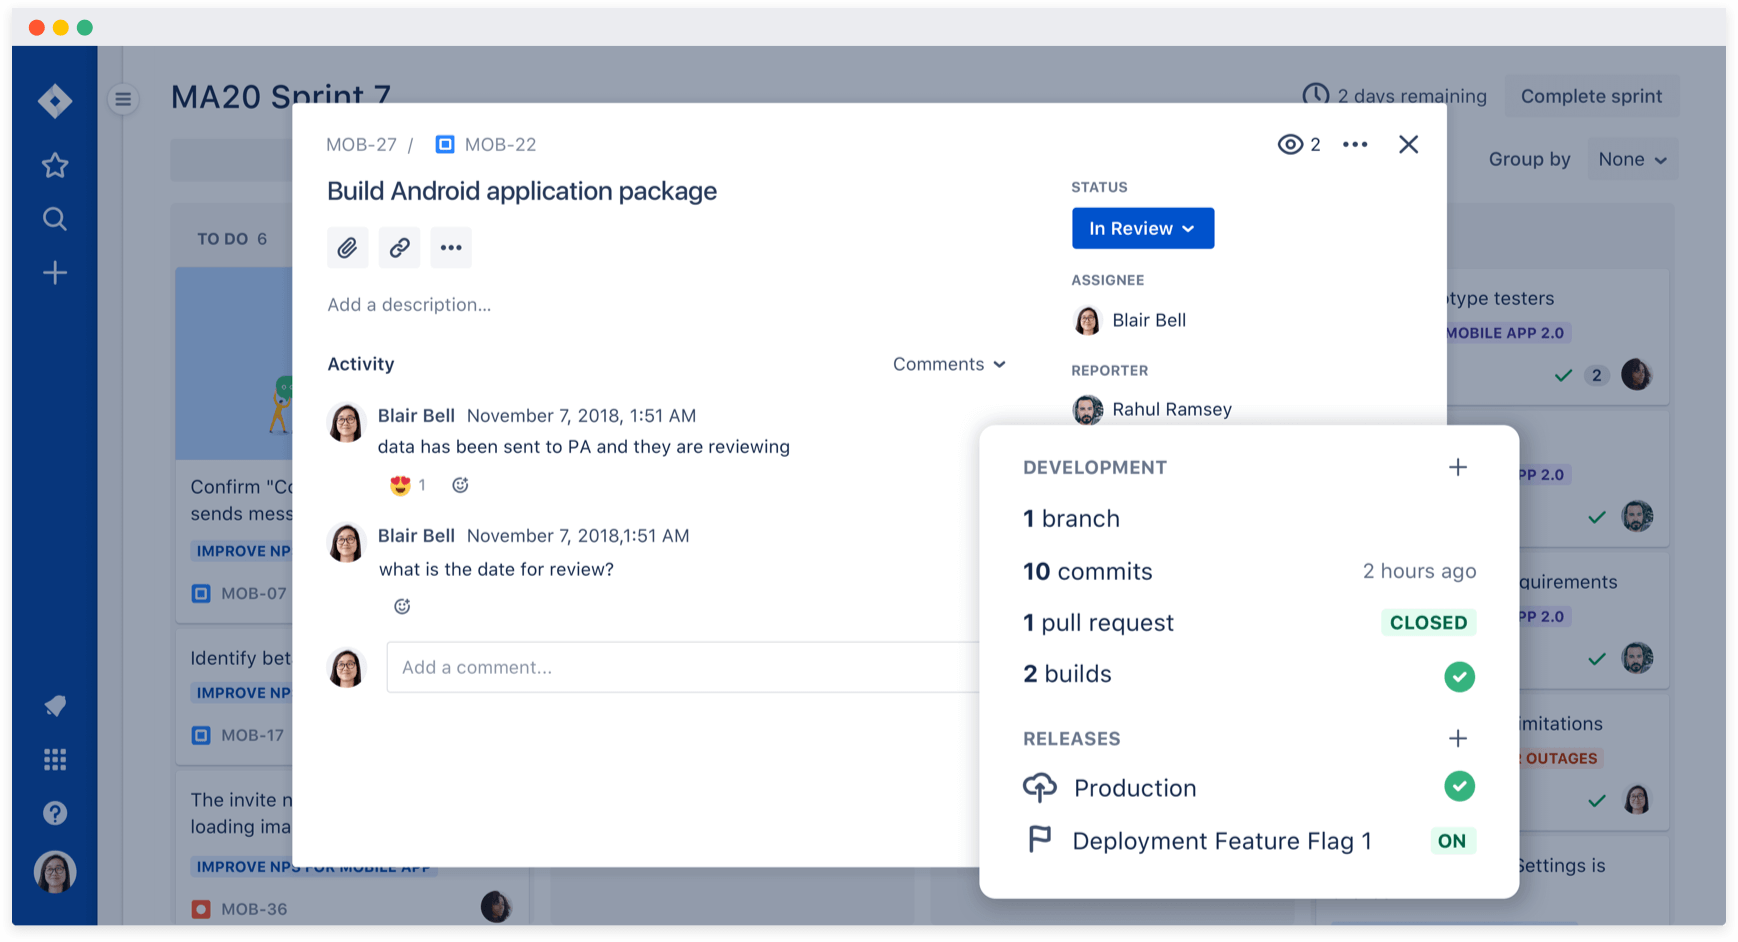 Understand the status of your development pipeline from Jira